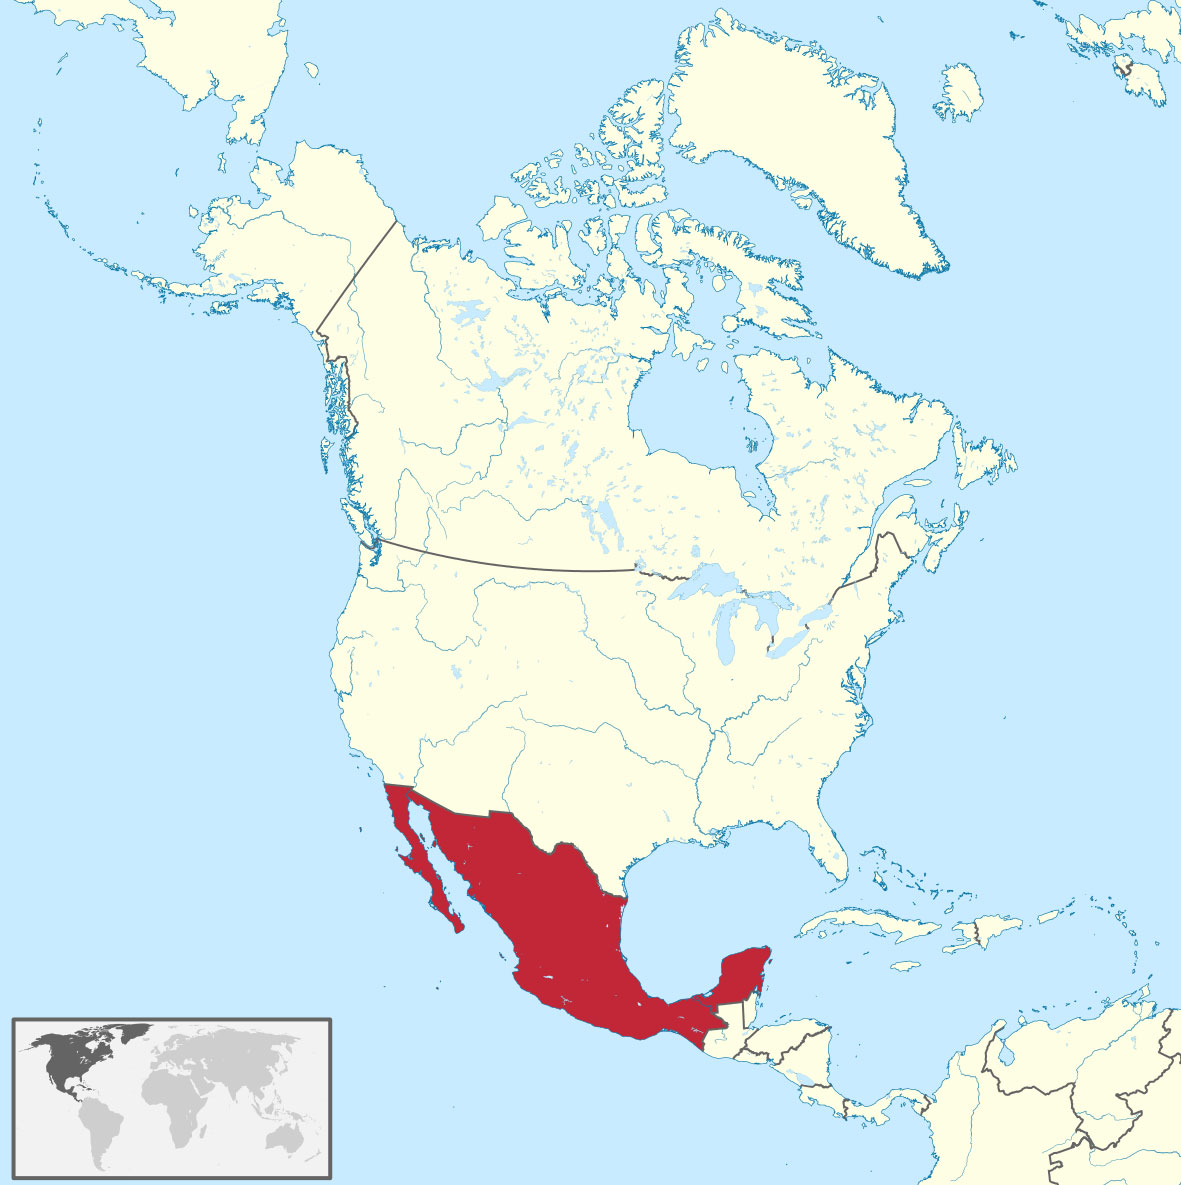 Mexico's map